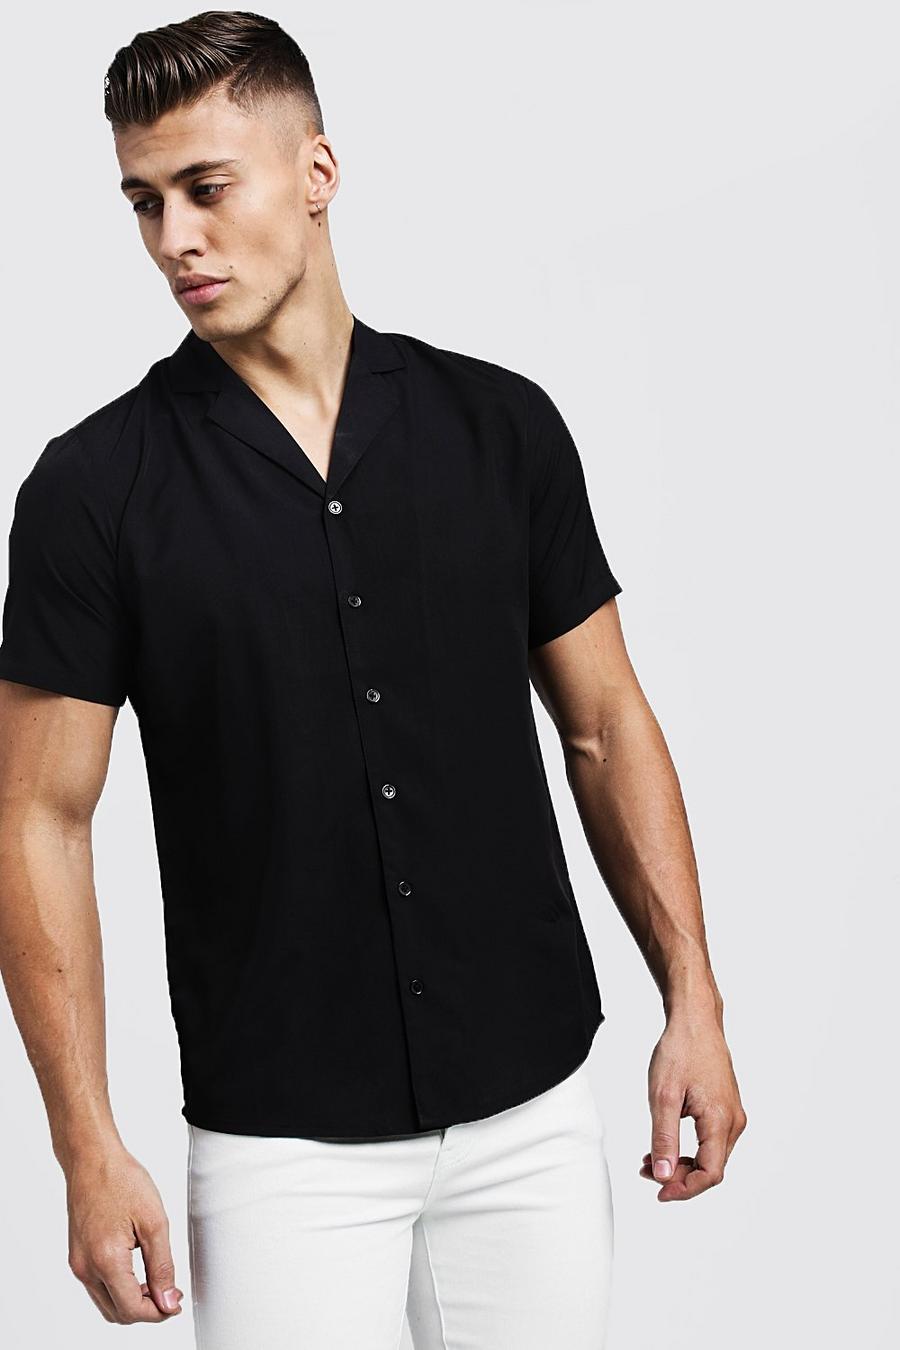 Black Short Sleeve Shirt With Revere Collar image number 1